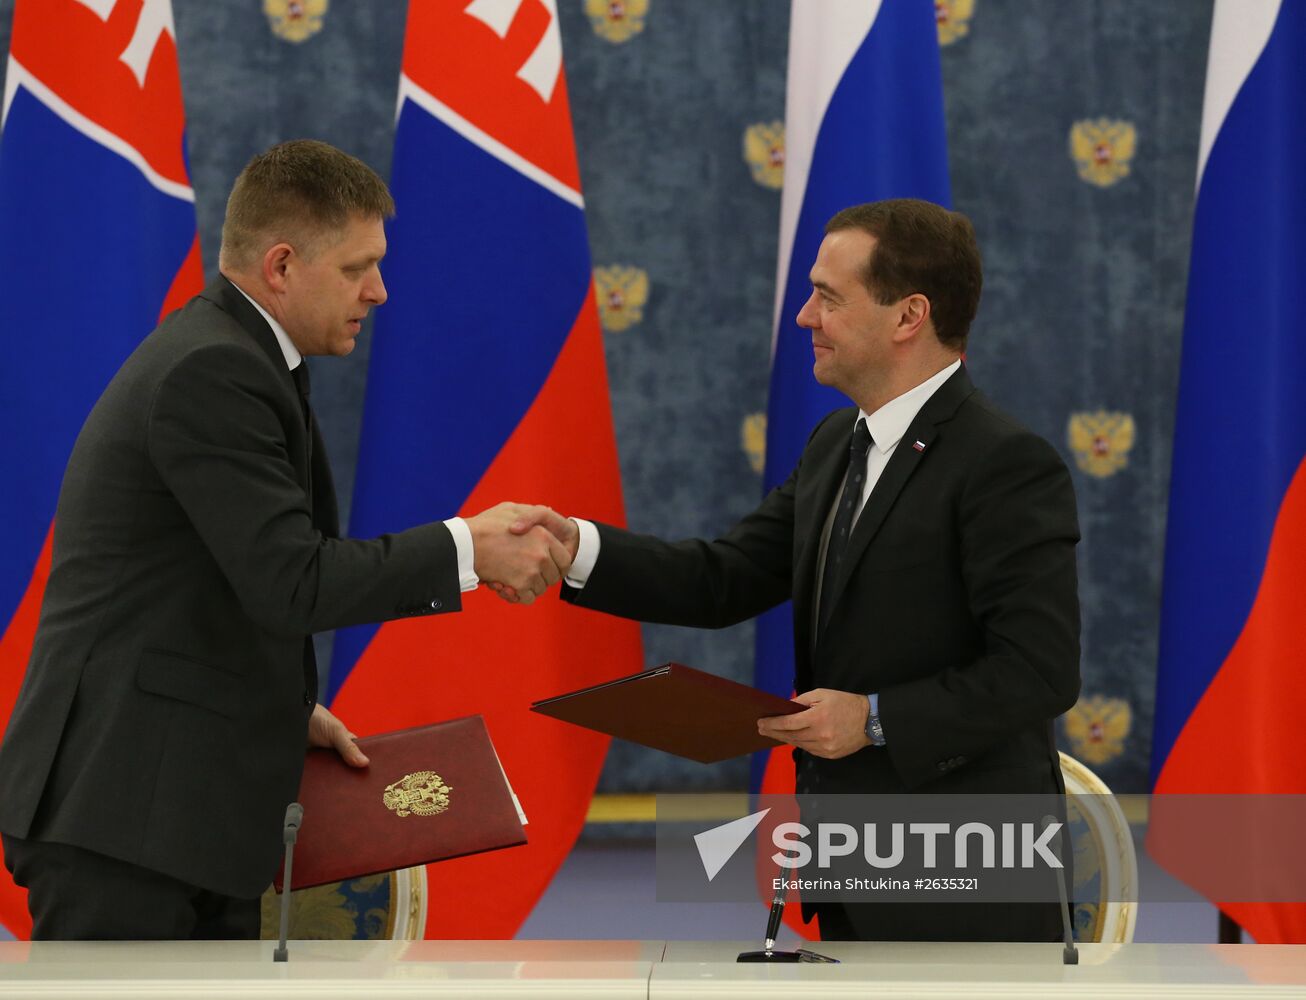 Russian Prime Minister Dmitry Medvedev's meeting with Prime Minister of Slovakia Robert Fico